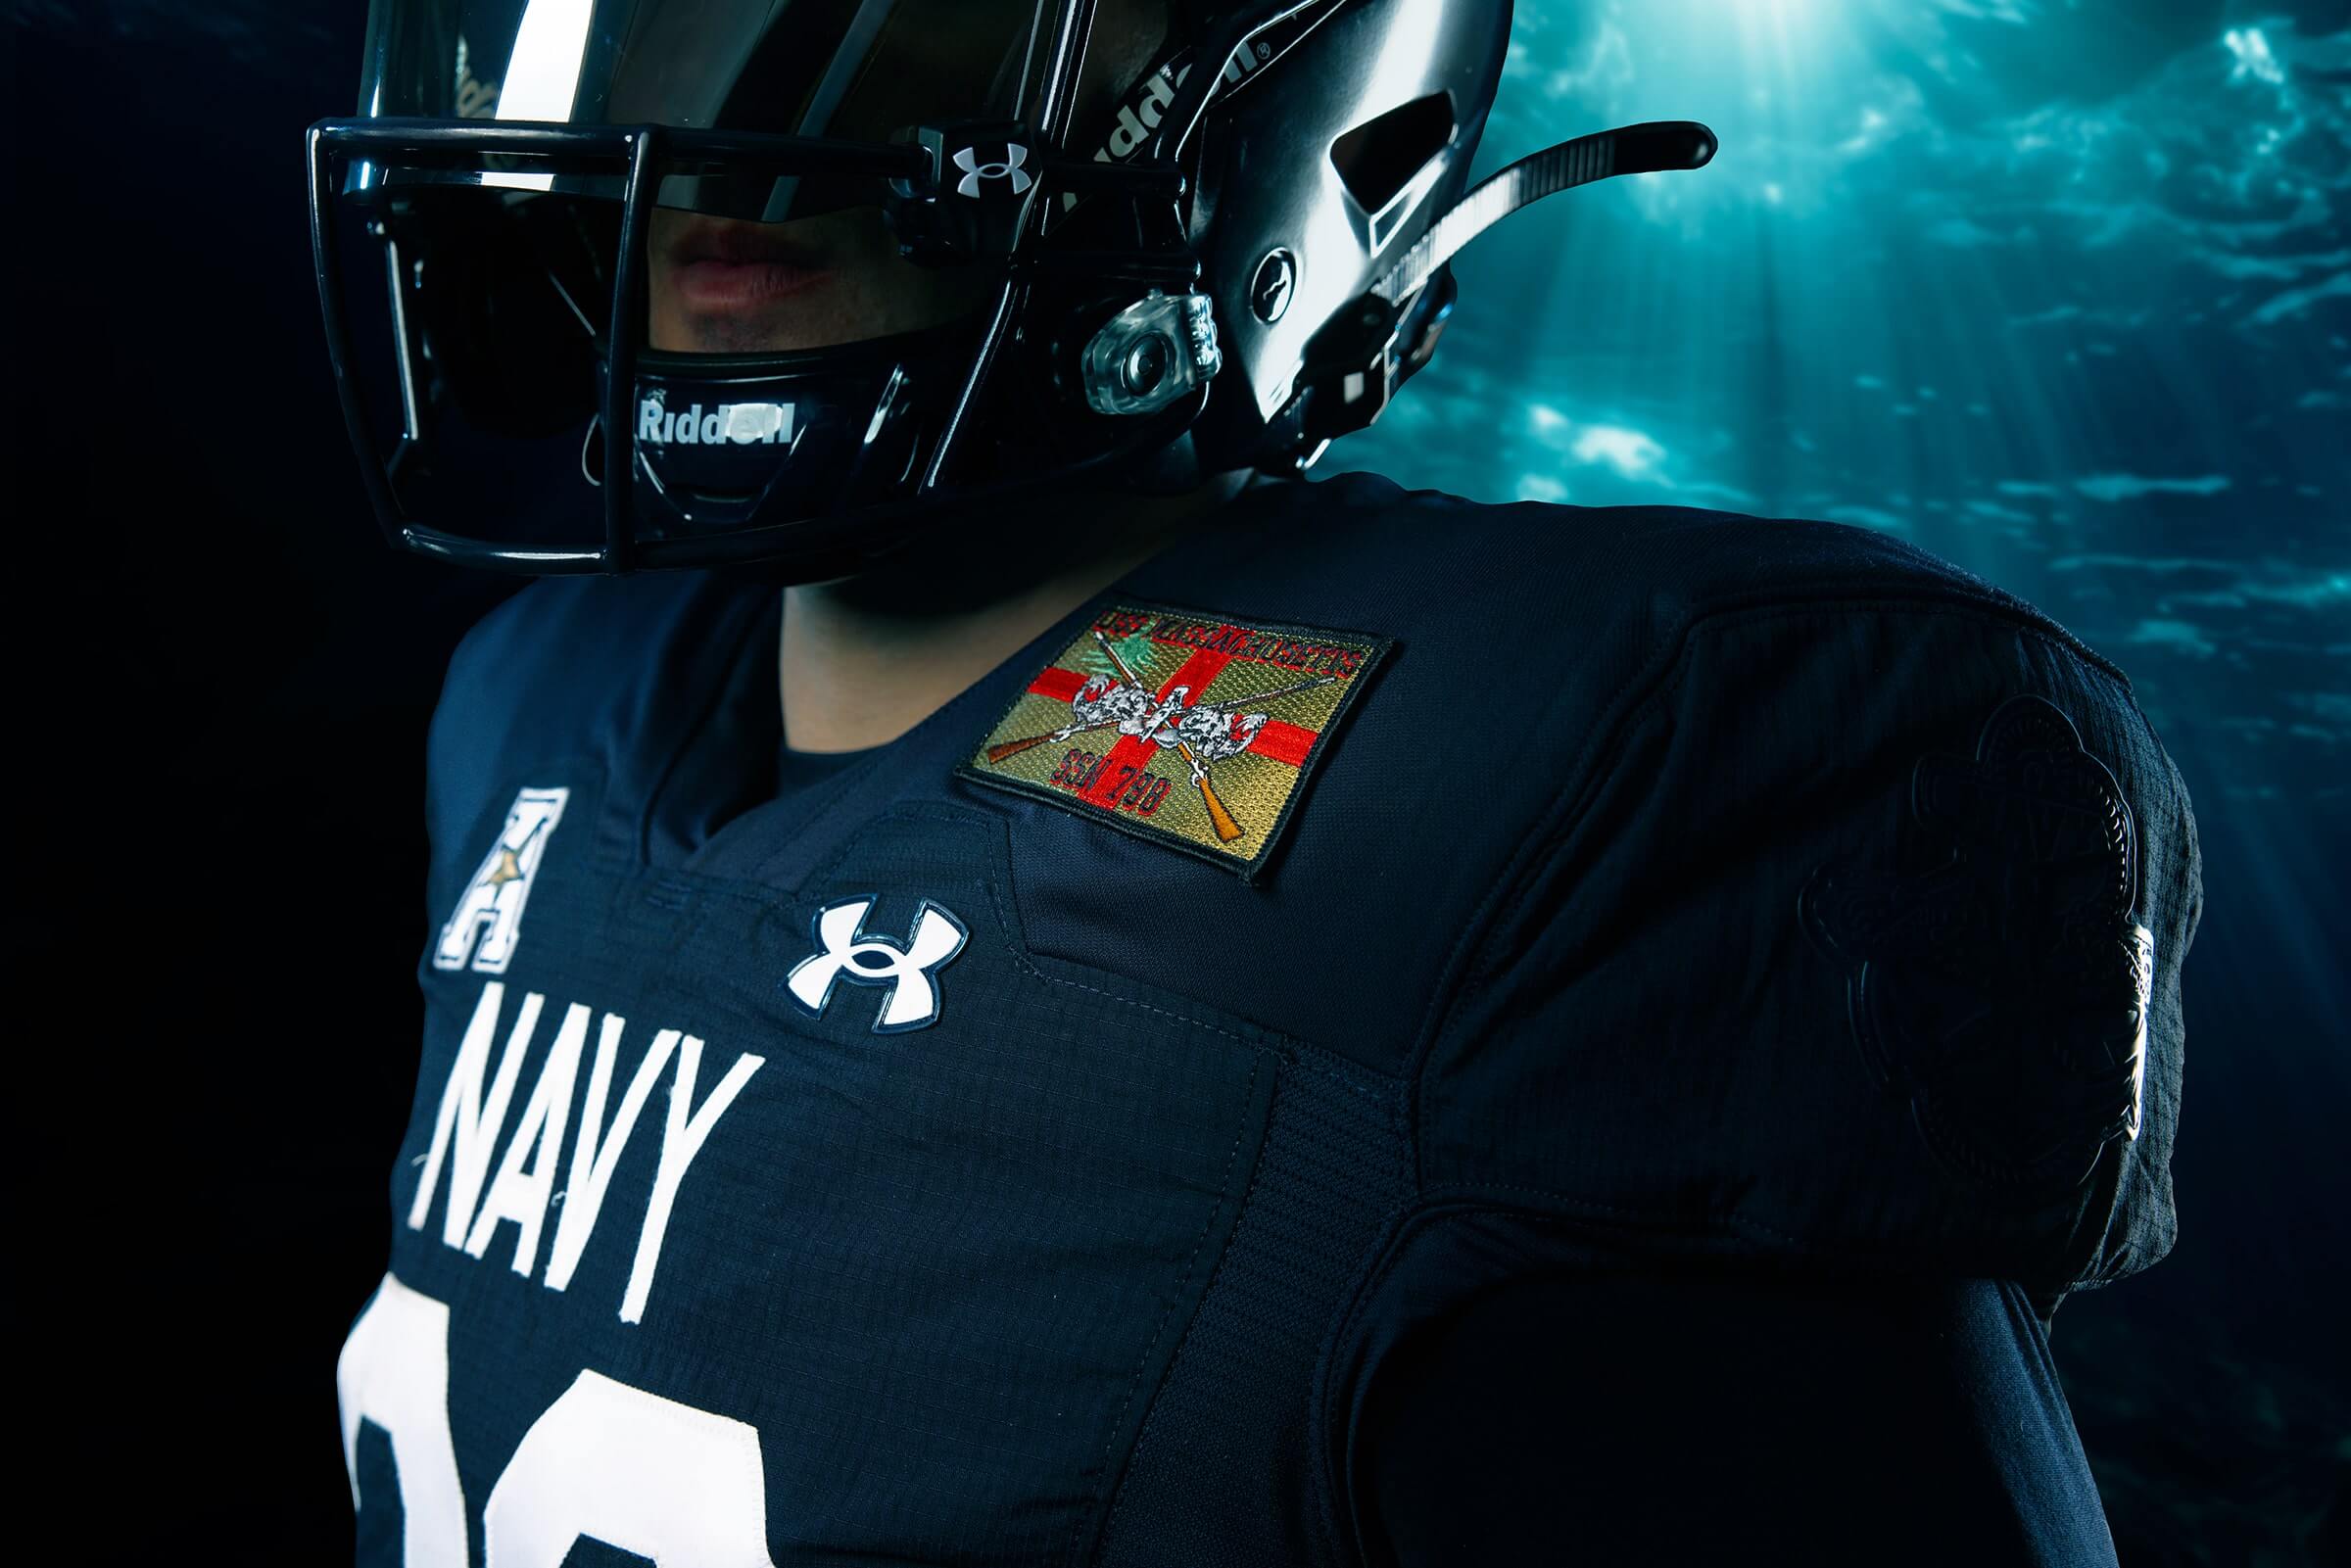 Navy Unveils Submarine-Themed Uni for Army/Navy Game